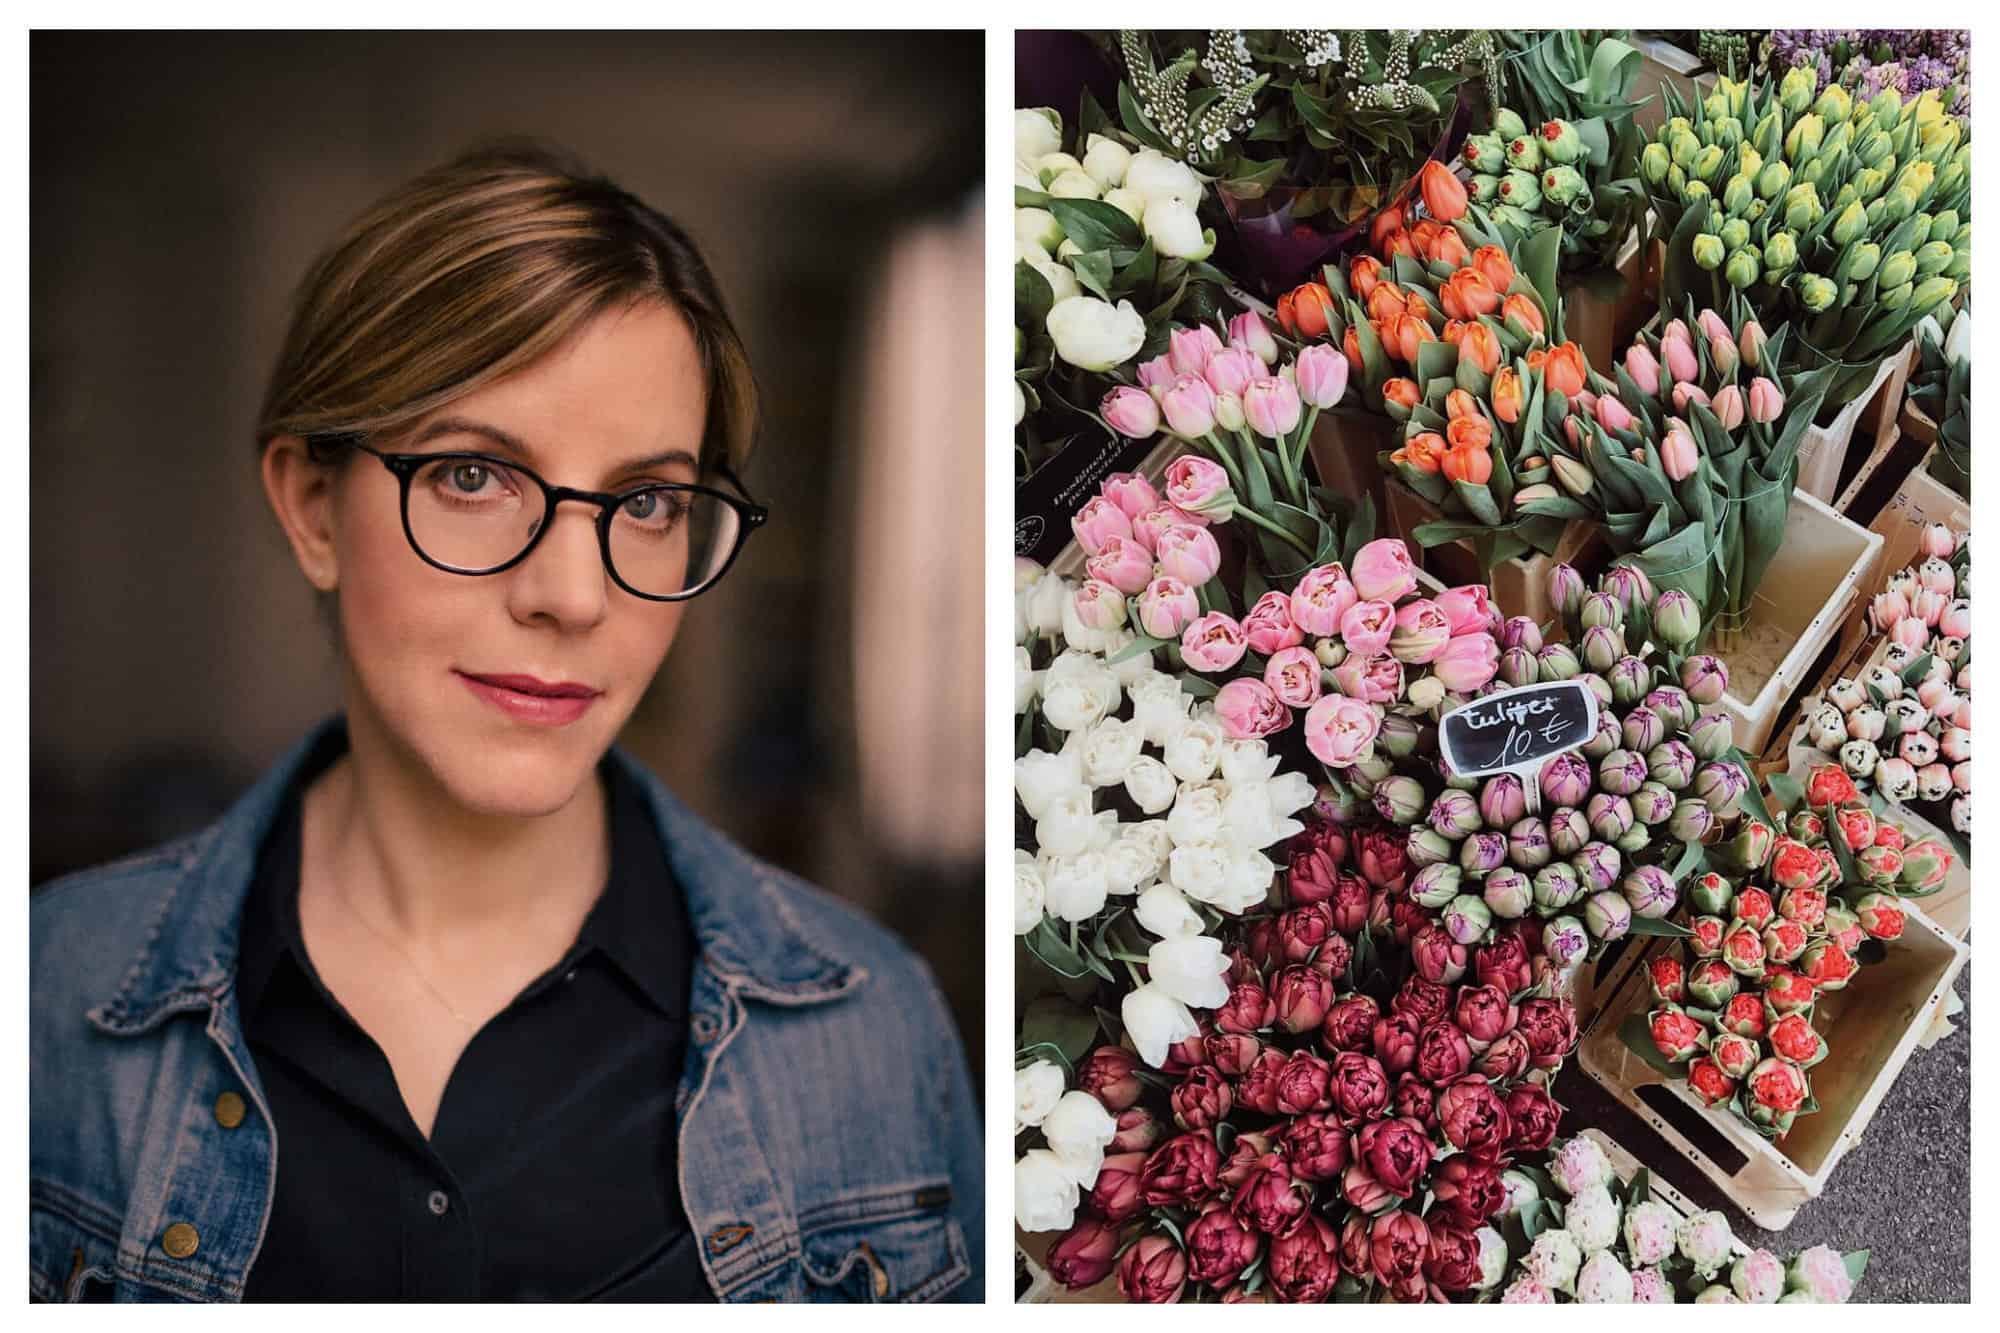 Left: Pamela Druckerman. Right: A variety of flowers, including tulips, on a street in Paris.